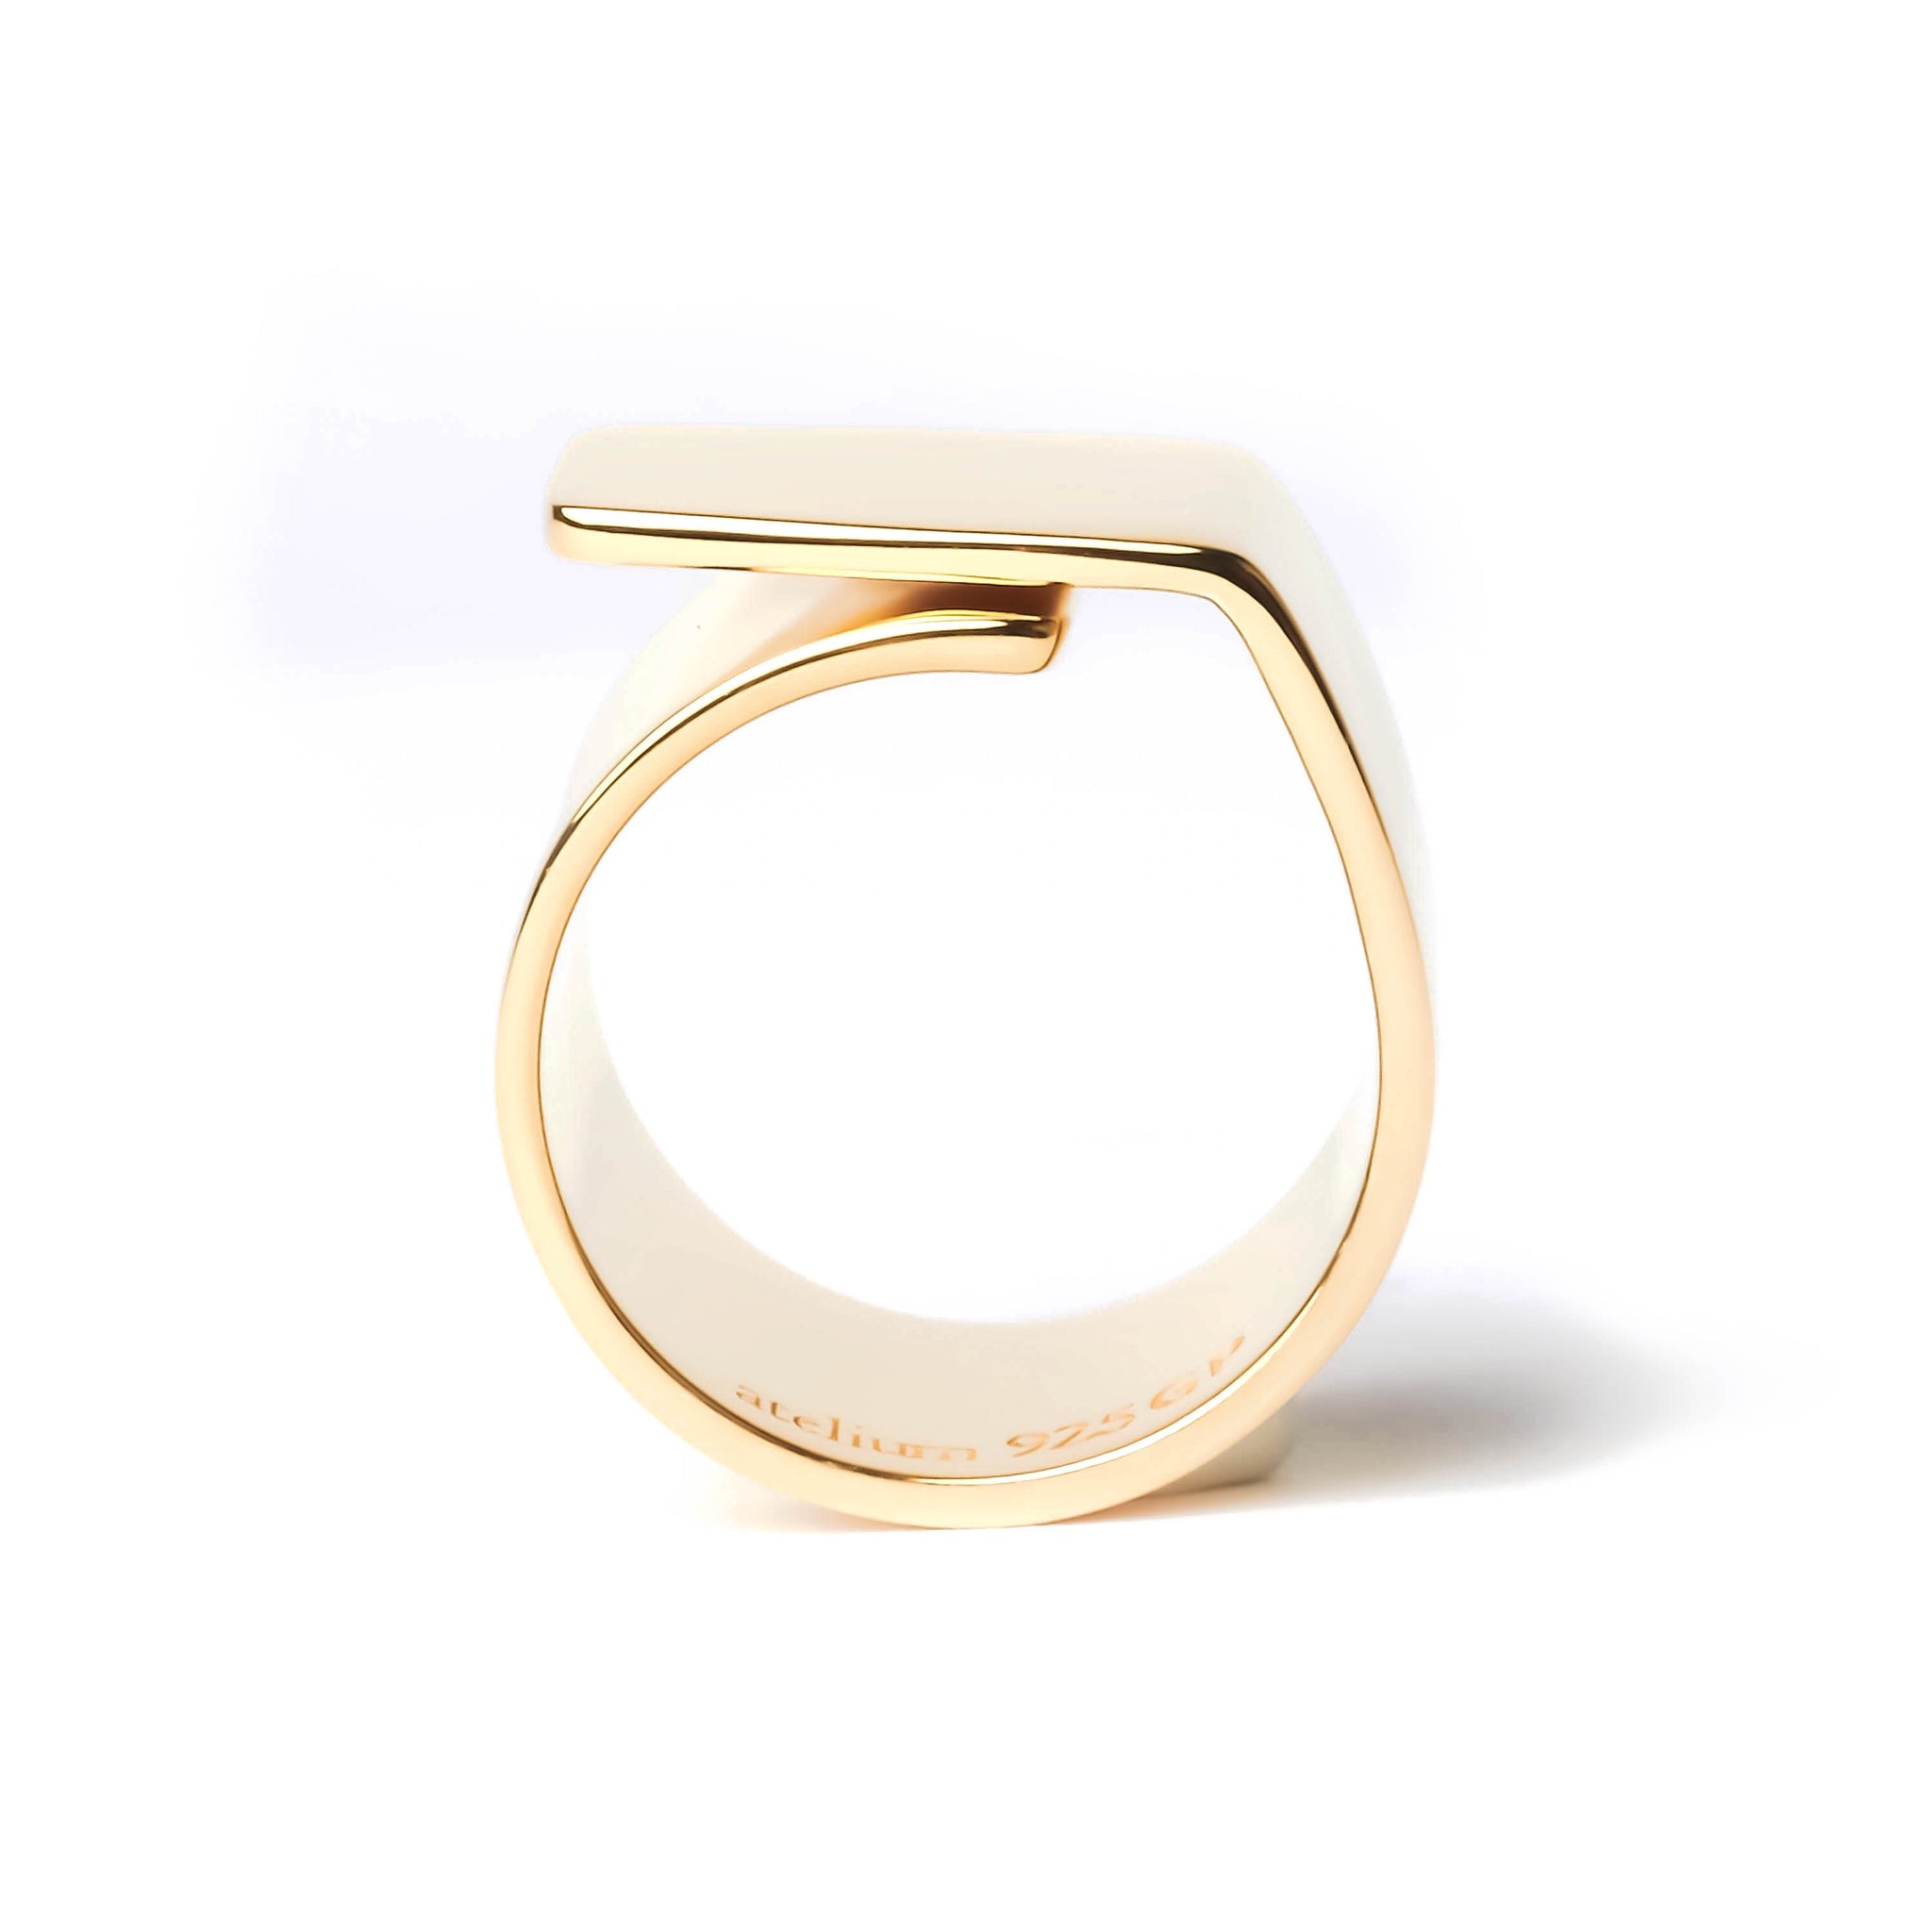 Wide gold ring with overlapping sides top view